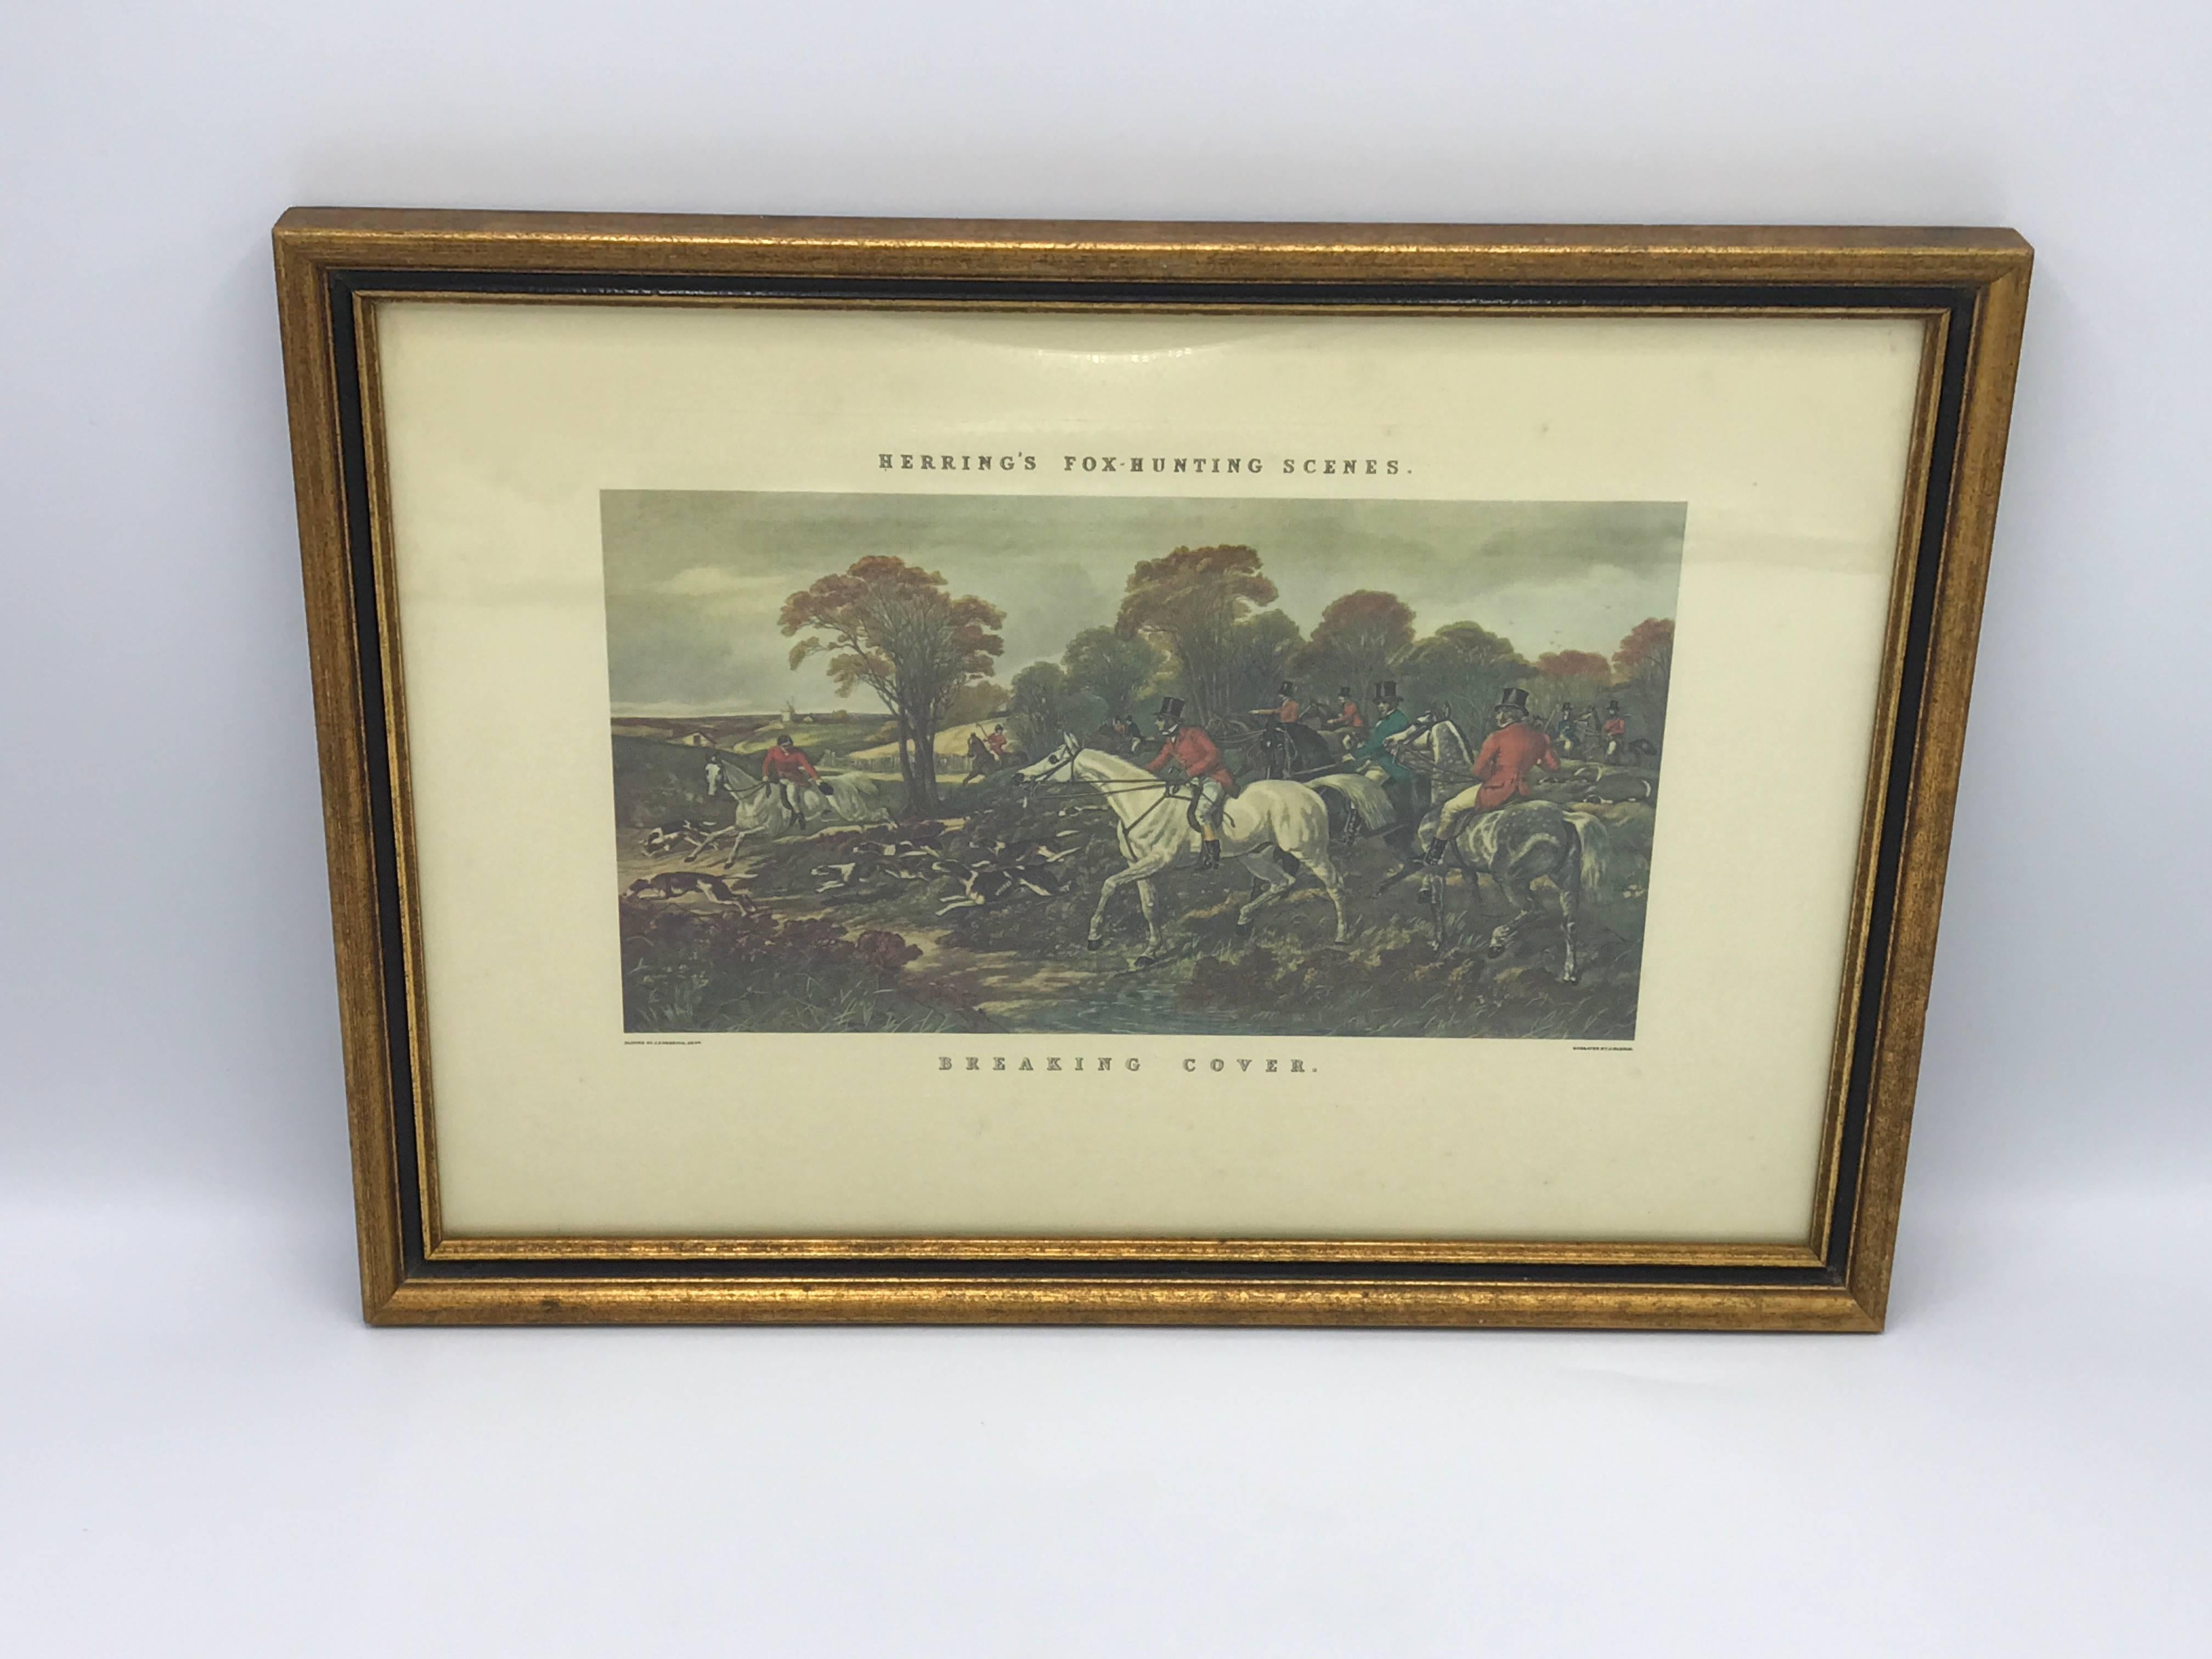 Offered is a gorgeous, 19th century hunt scene print in a gilded frame.